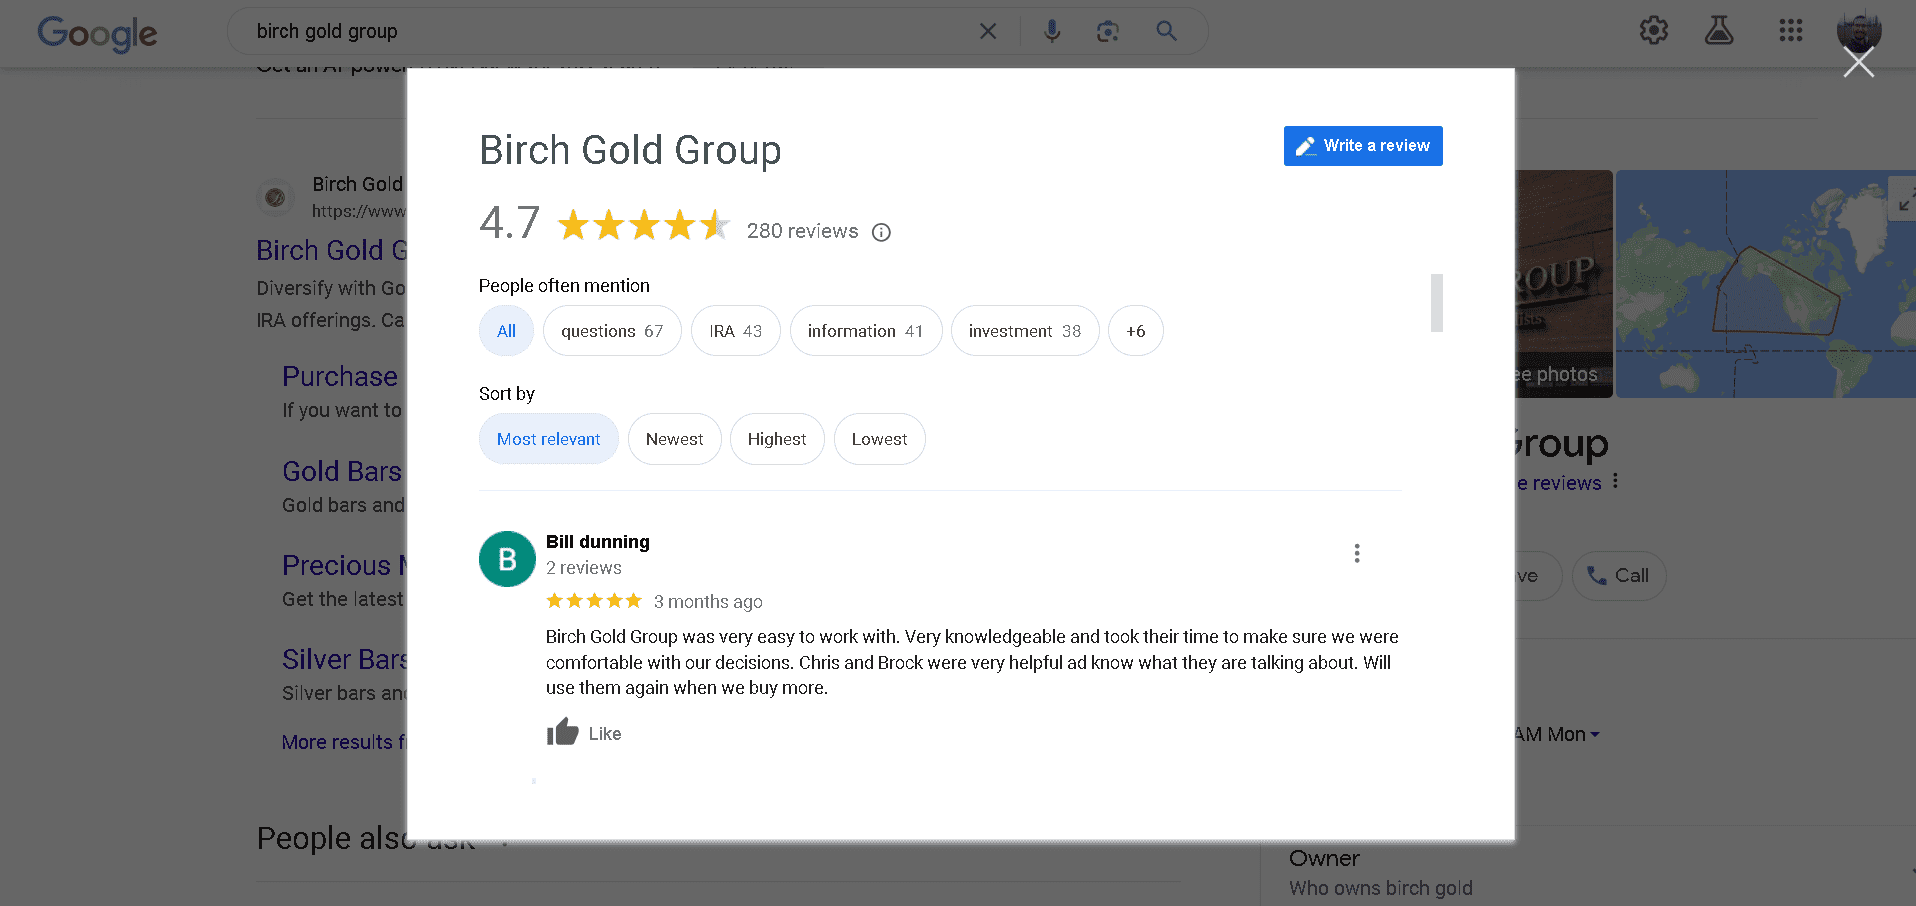 Birch Gold Group Google My Business profile and customer reviews